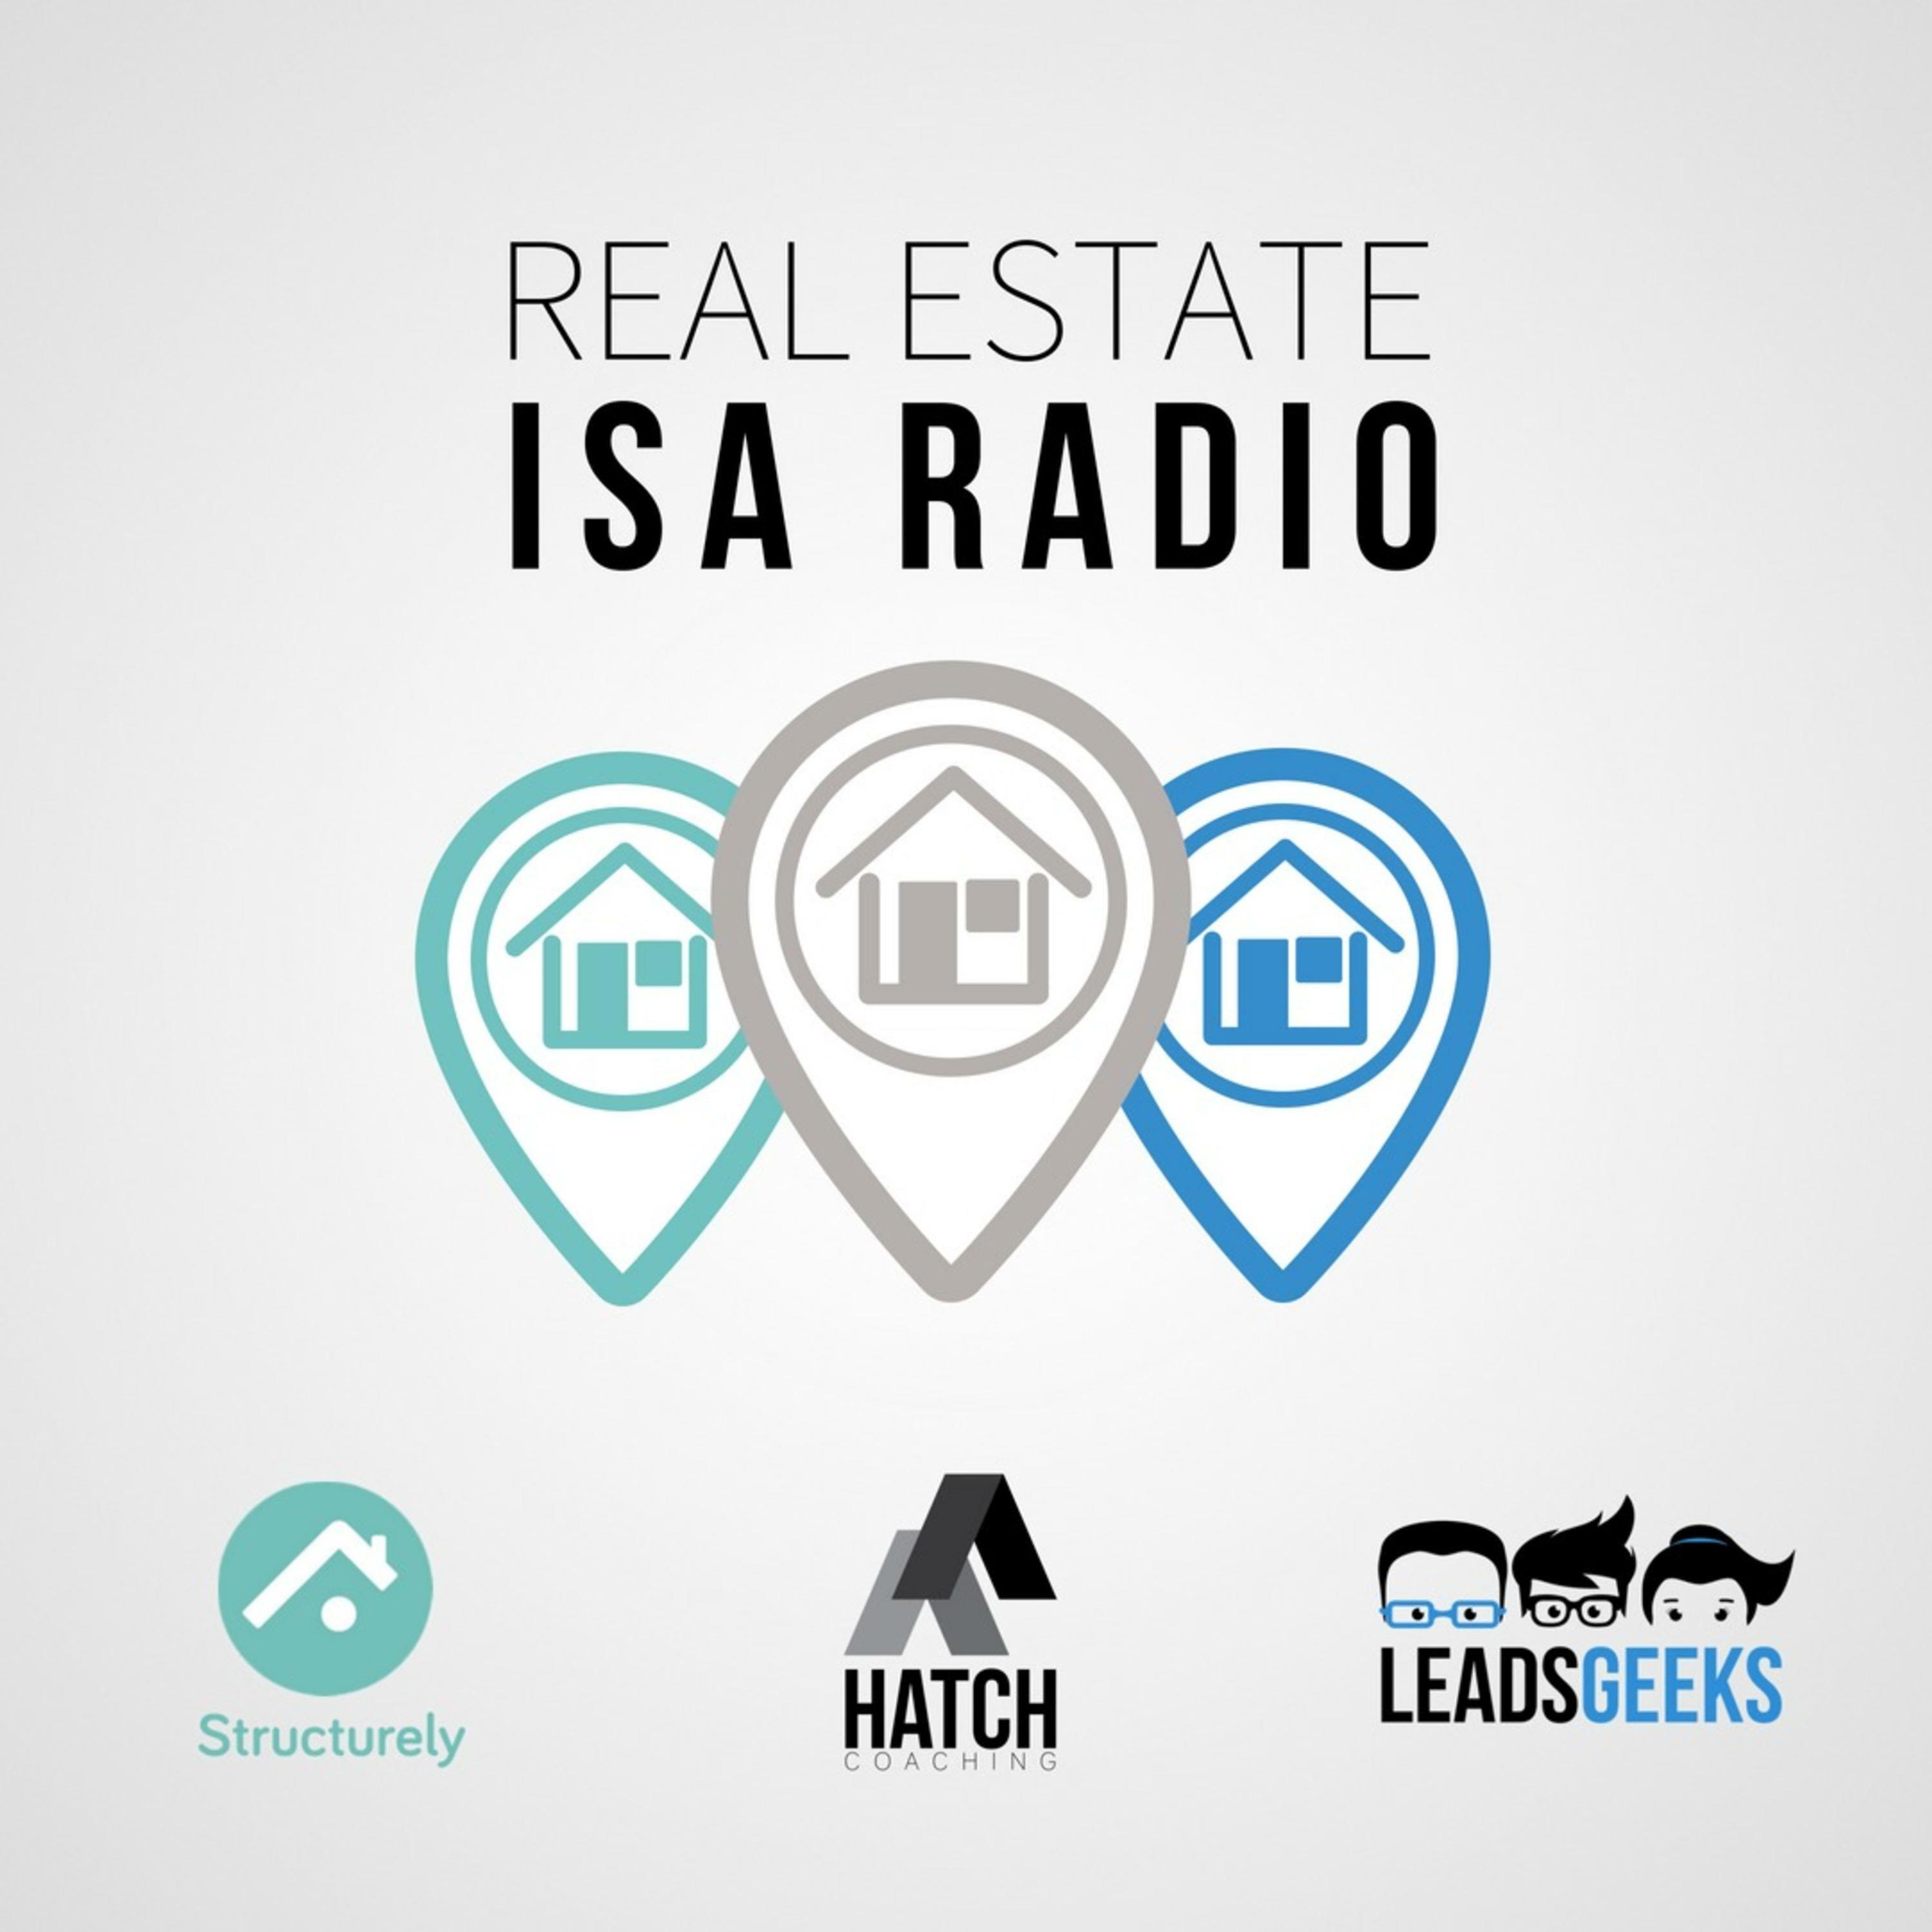 Full Real Estate with ISA - Spanish & English - Funnel Xchange